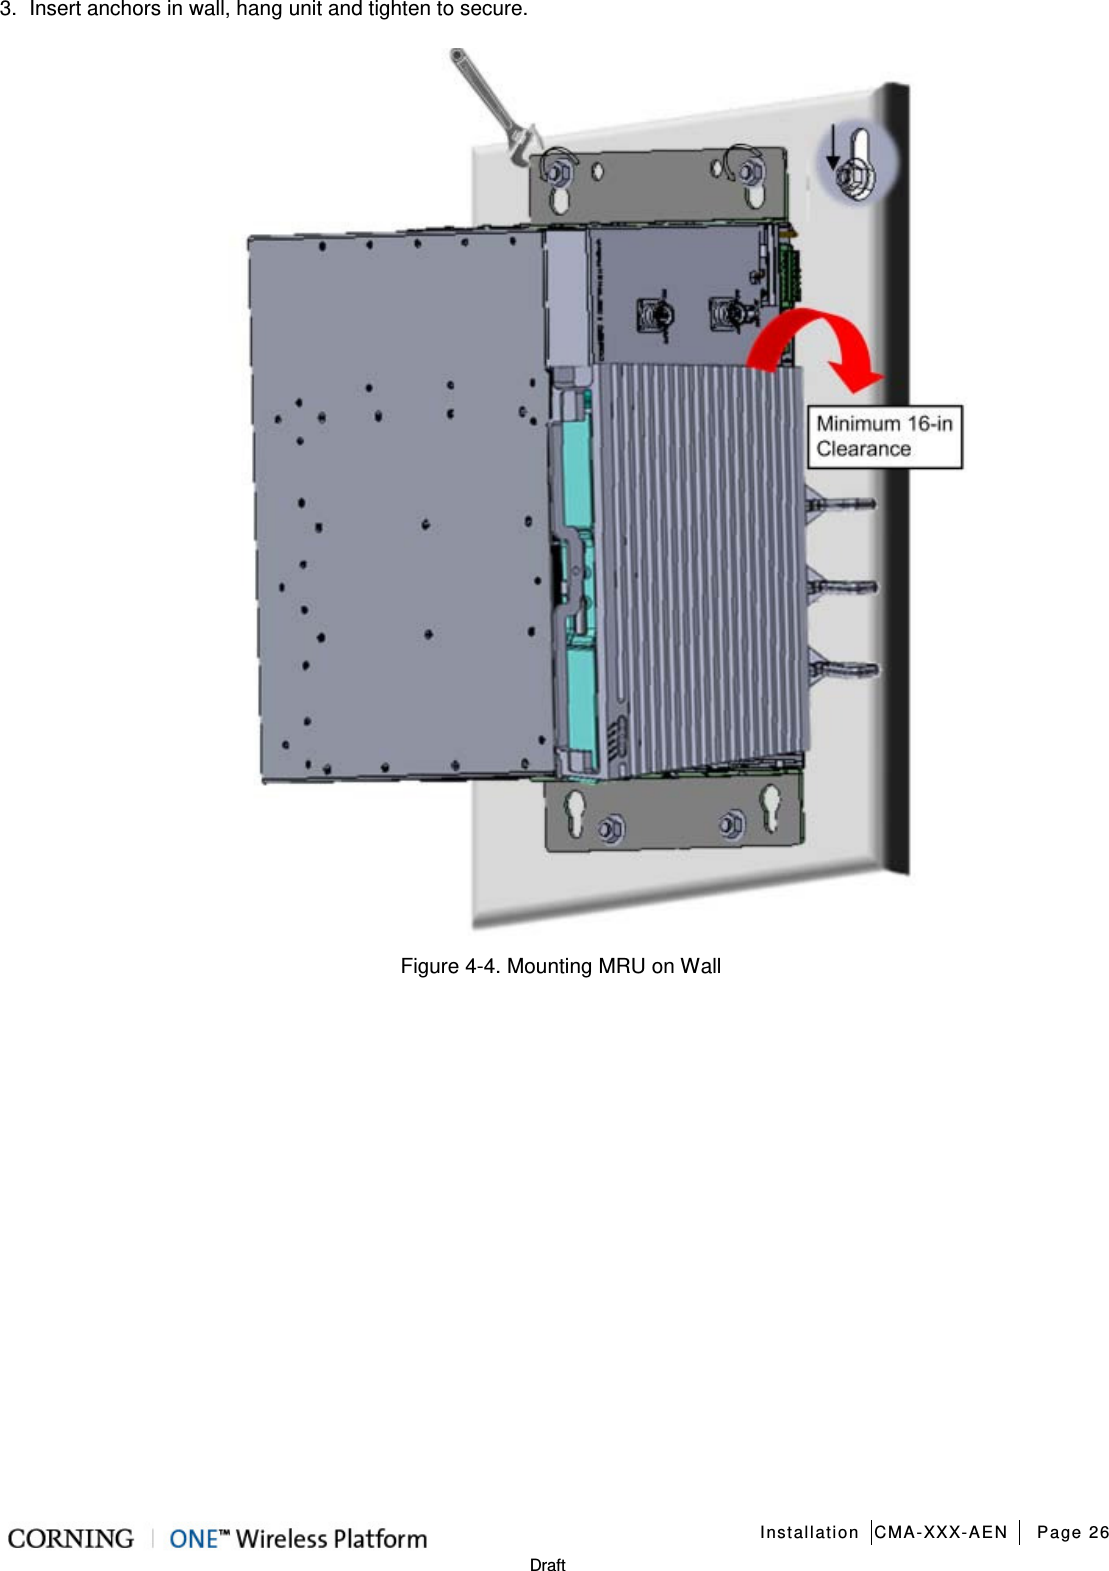   Installation CMA-XXX-AEN Page 26   Draft 3.  Insert anchors in wall, hang unit and tighten to secure.  Figure  4-4. Mounting MRU on Wall   